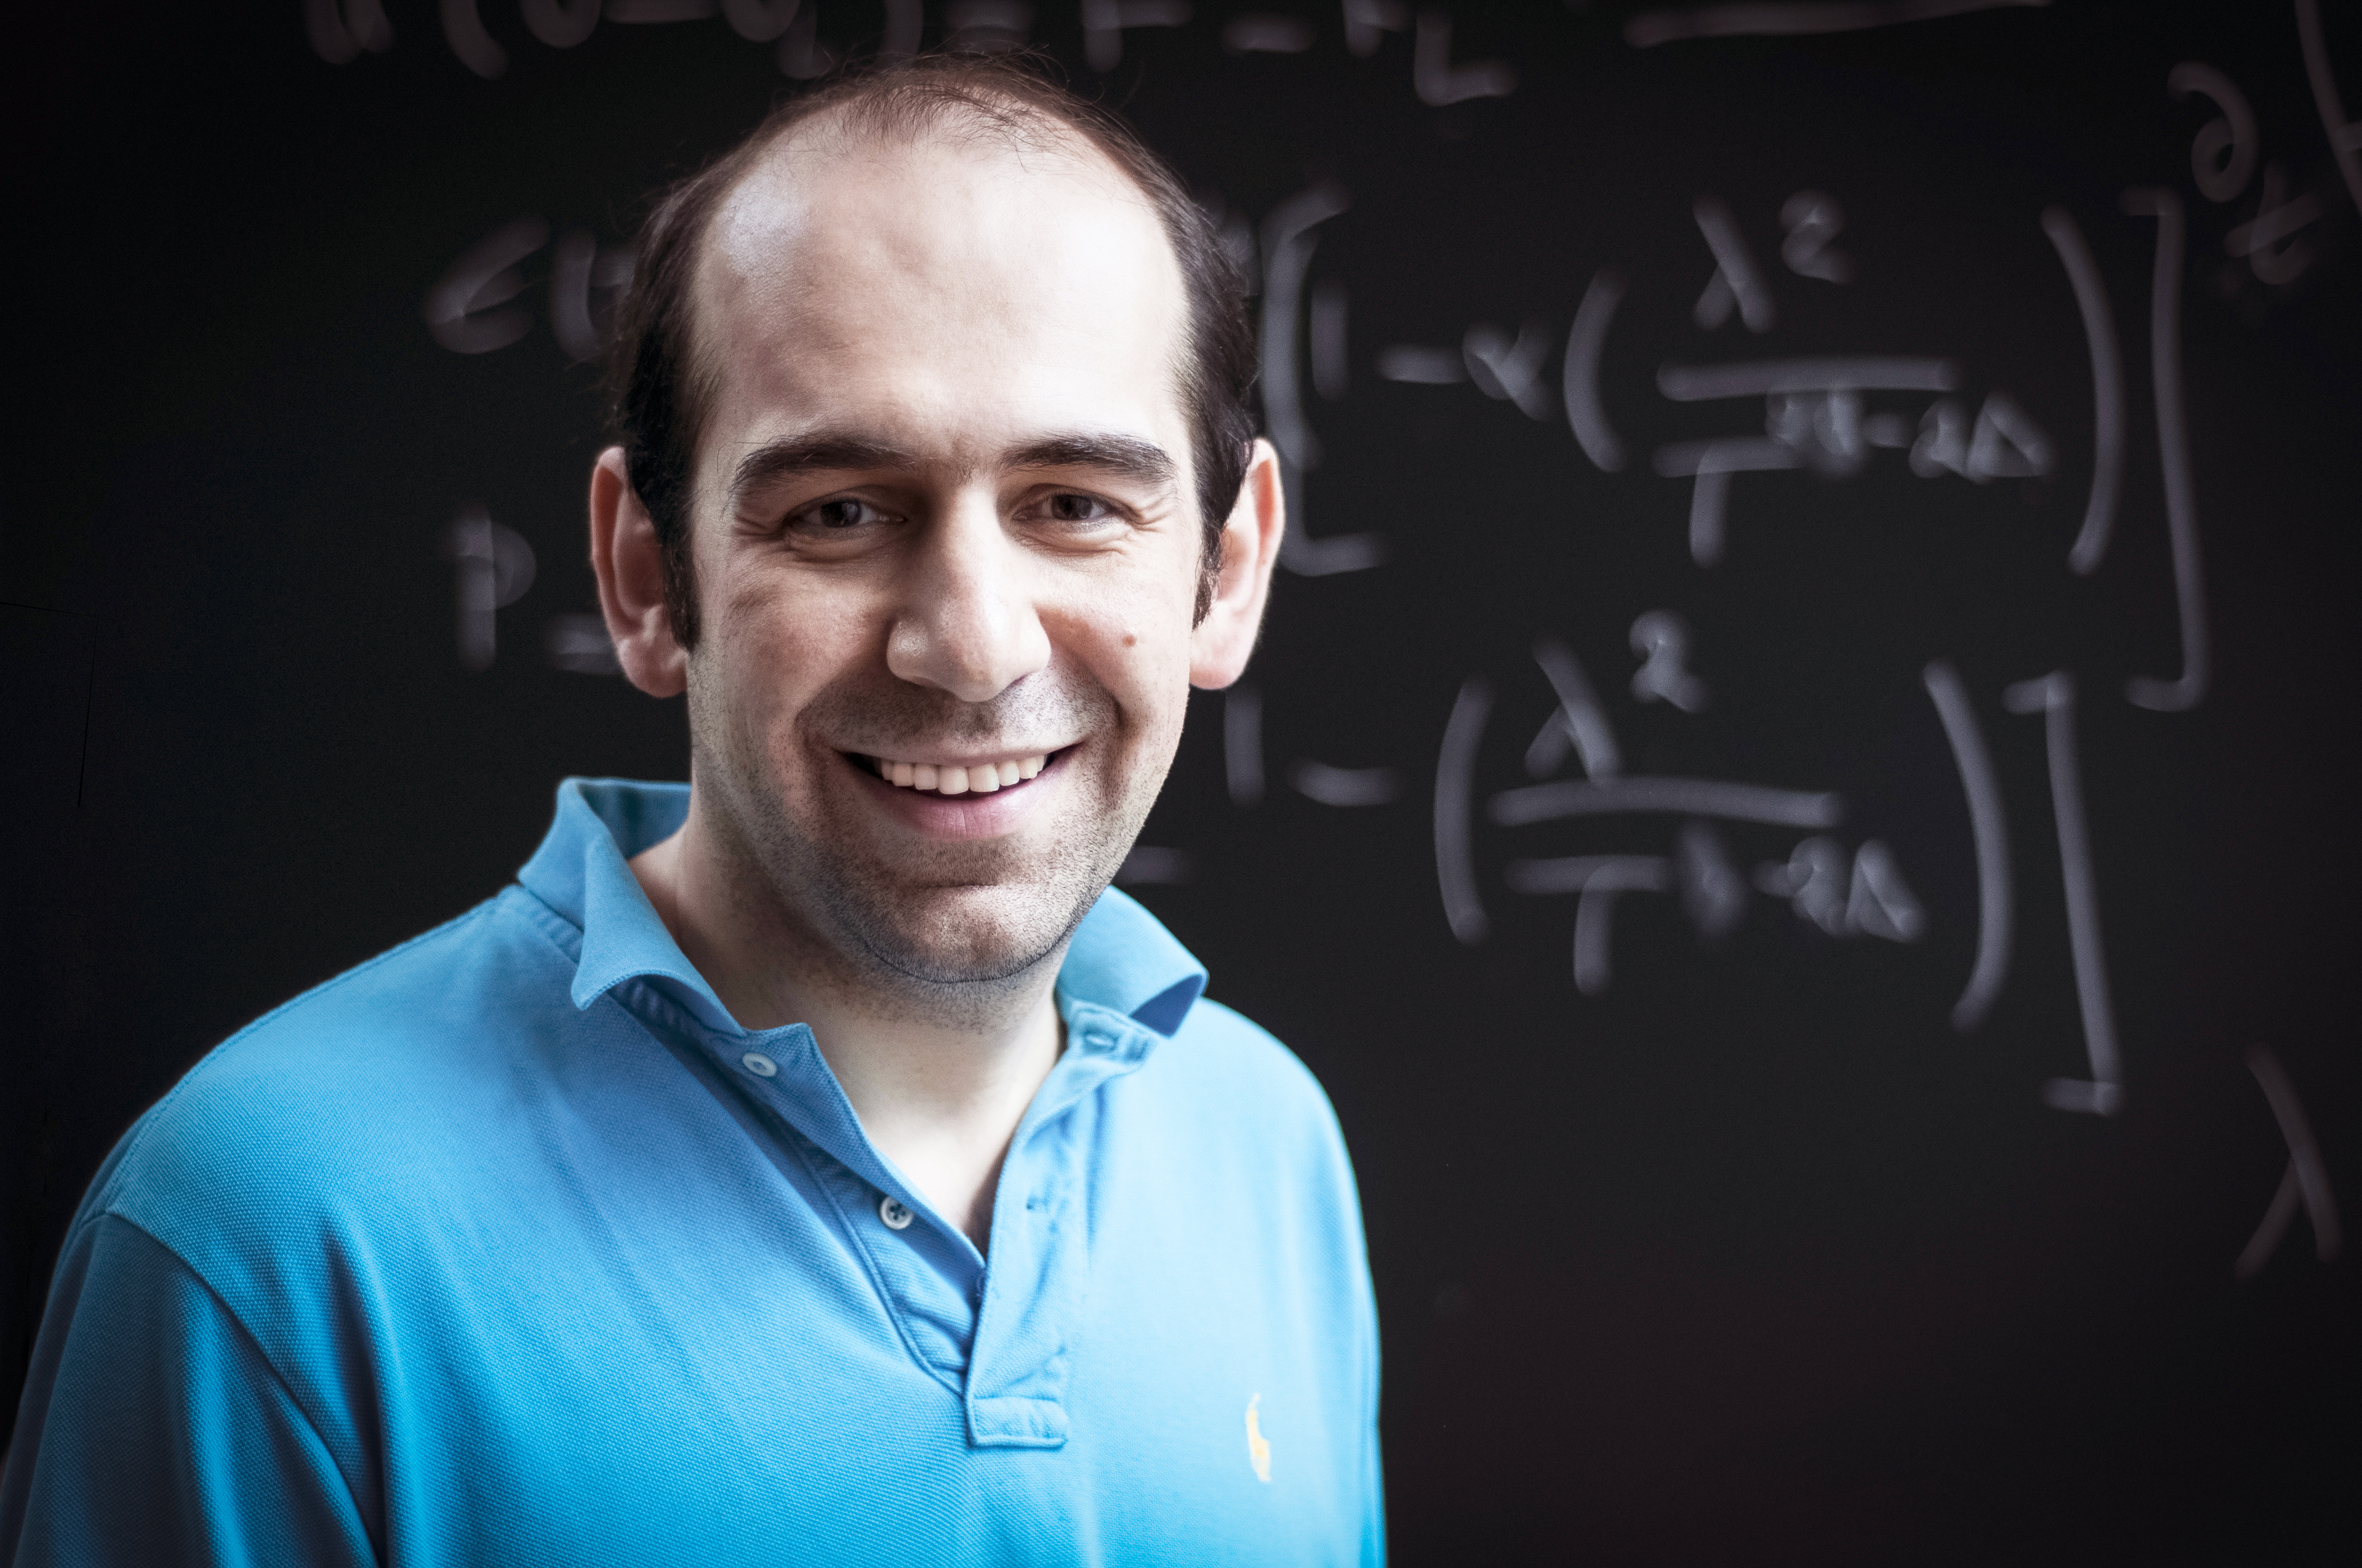 Portrait of Niayesh Afshordi, winner of the 2019 Buchalter Cosmology Prize for his pioneering work on black holes